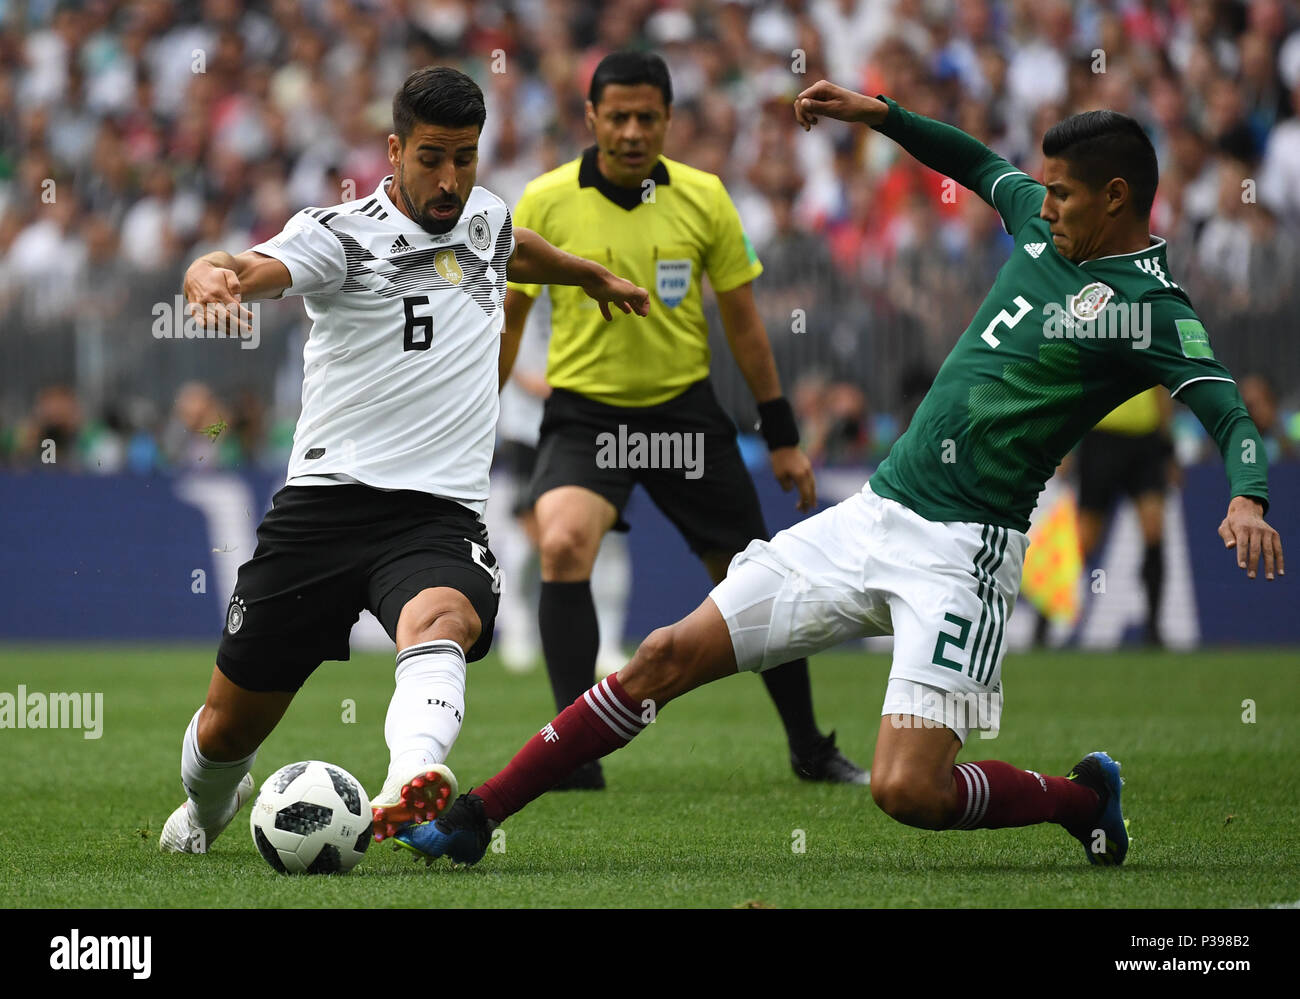 17 June 2018, Russia, Moscow, Soccer, FIFA World Cup, Group F, Matchday 1 of 3, Germany vs Mexico at the Luzhniki Stadium: Mexico's Hugo Ayala Castro and Germany's Sami Khedira (L) vie for the ball. Photo: Ina Fassbender/dpa Stock Photo